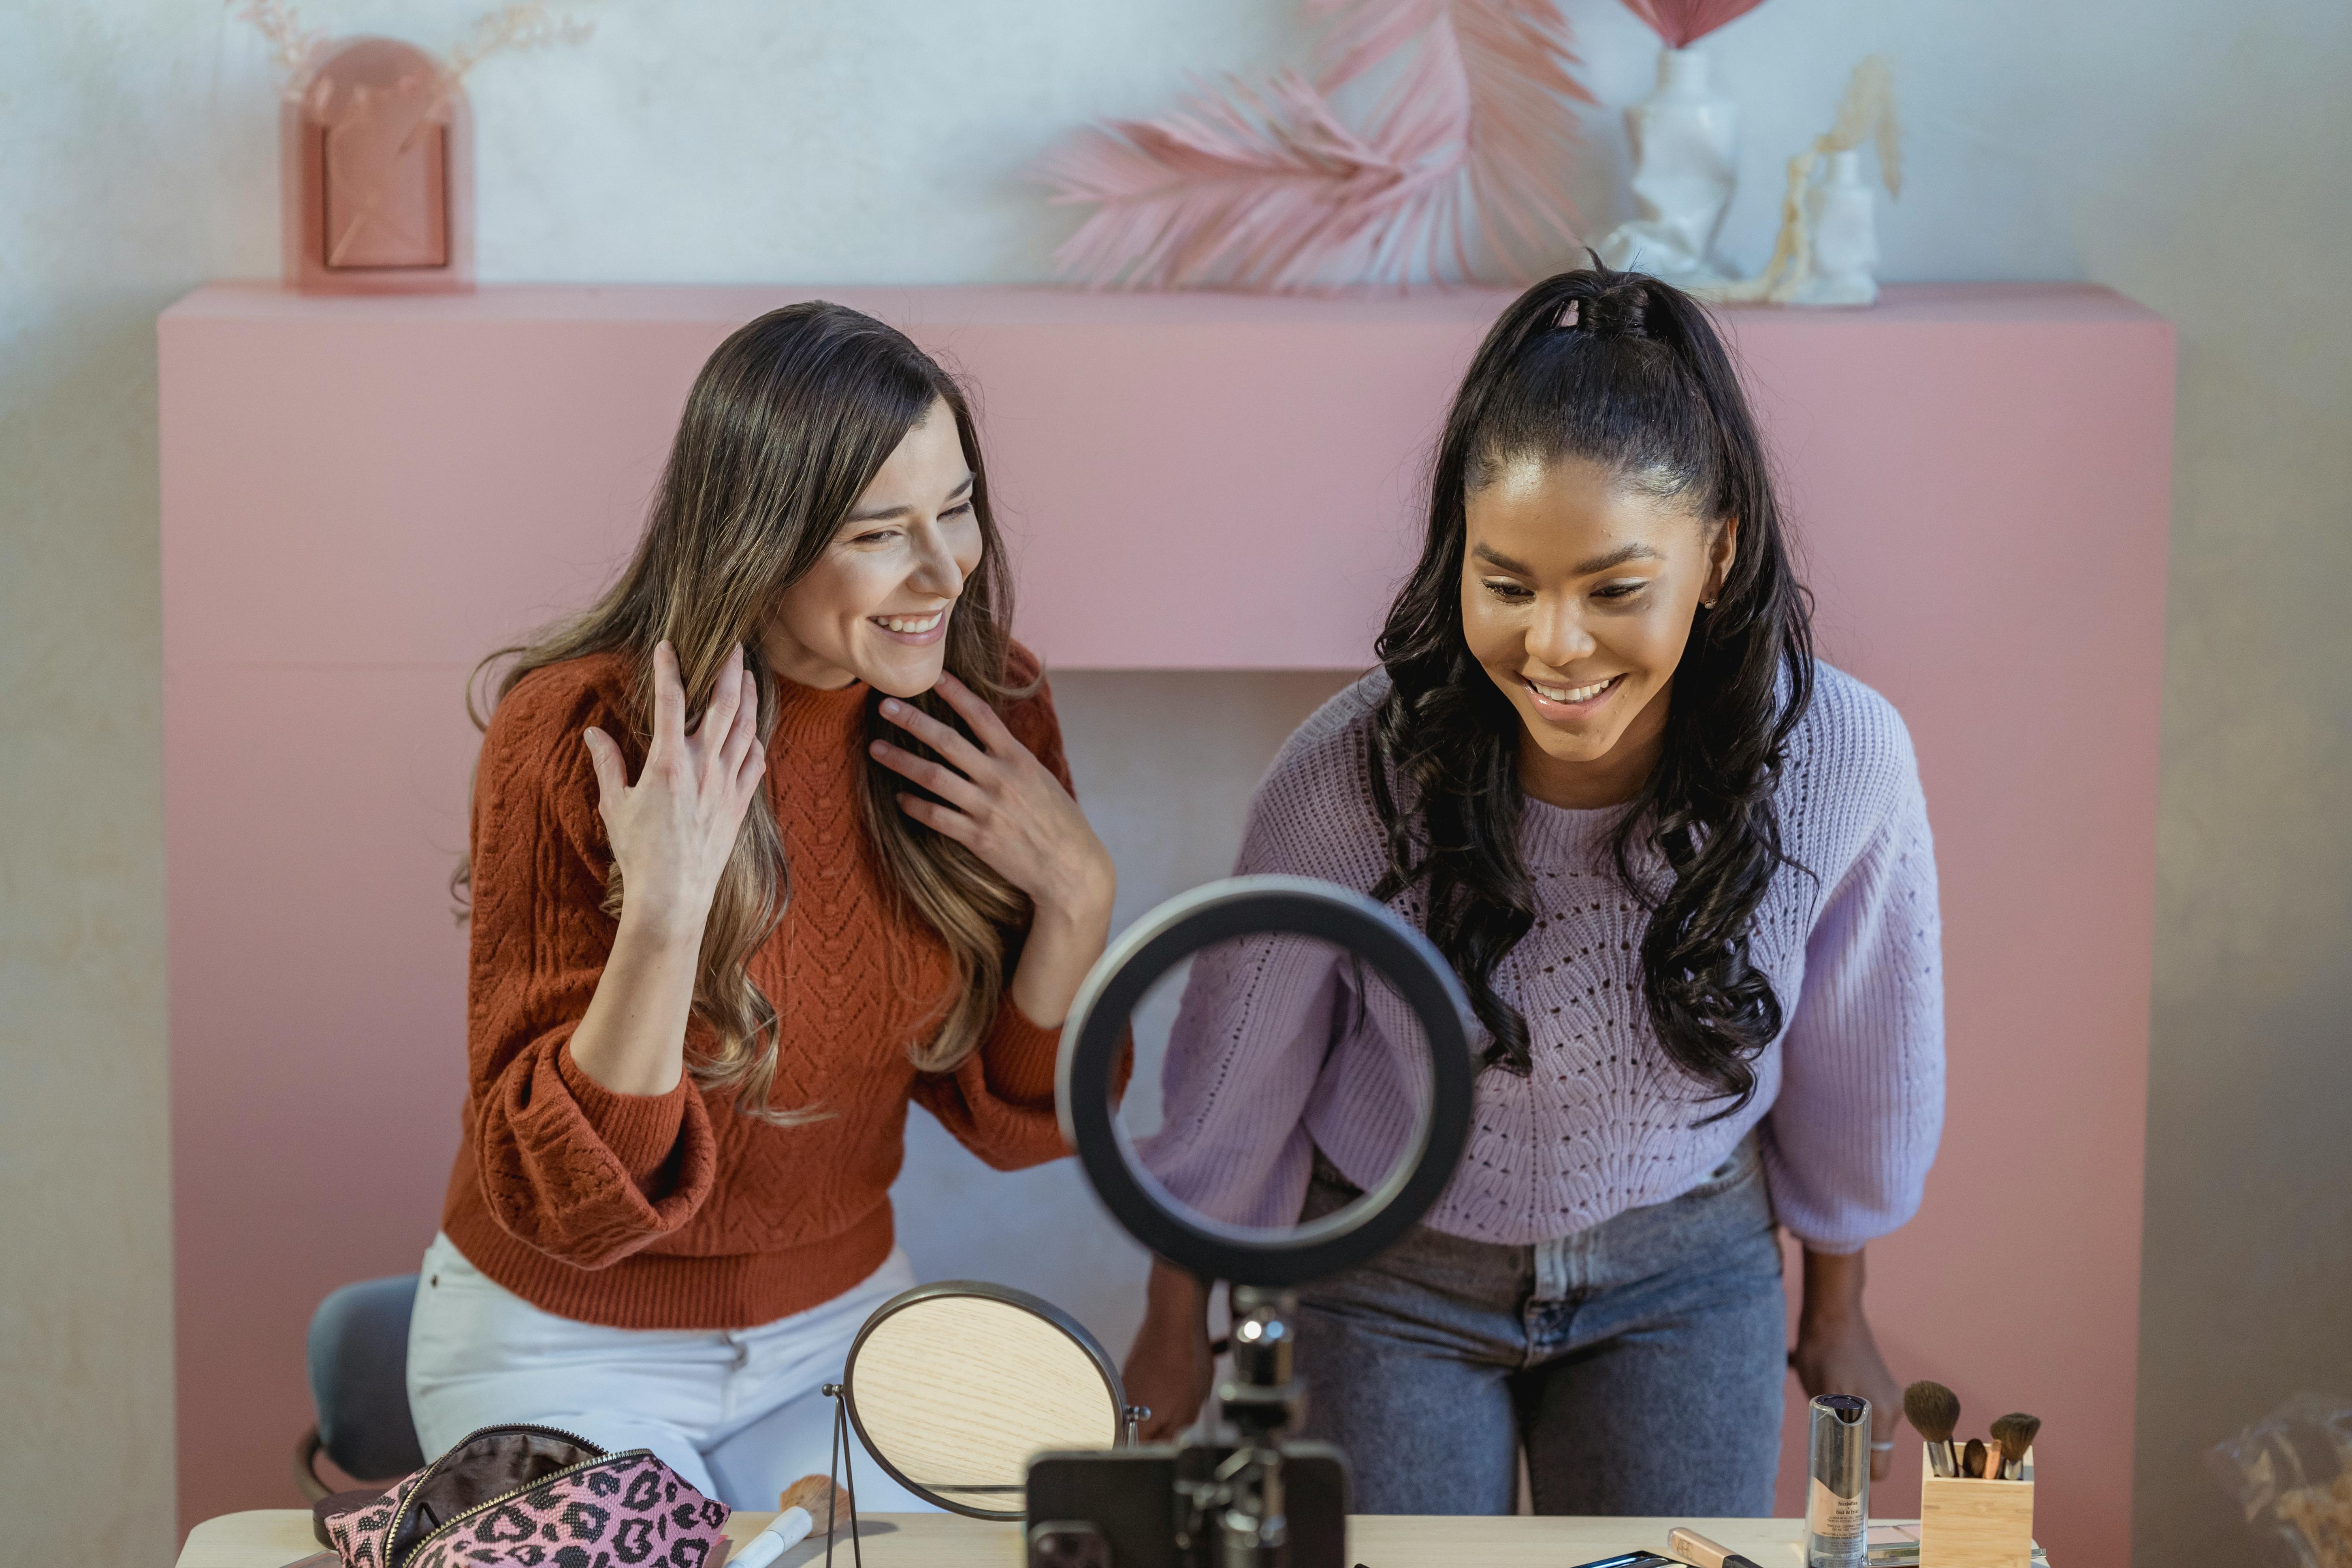 For illustration purposes only. Two woman look at the makeup and tools on the table | Source: Pexels